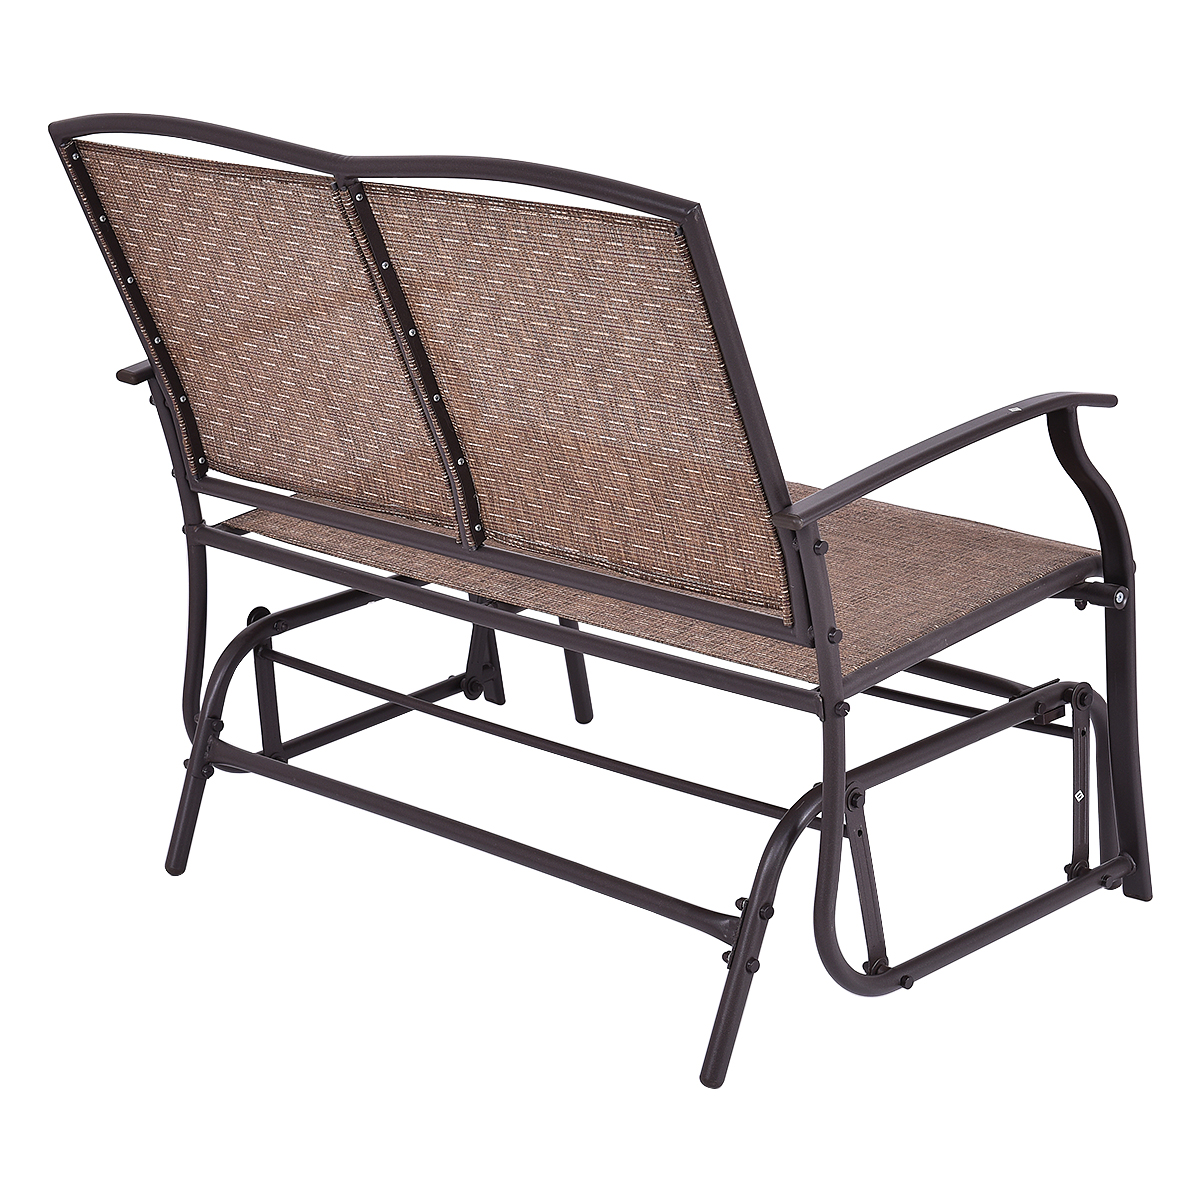 Costway Patio Glider Outdoor Rocking Bench Double 2 Person Chair Loveseat Armchair Backyard